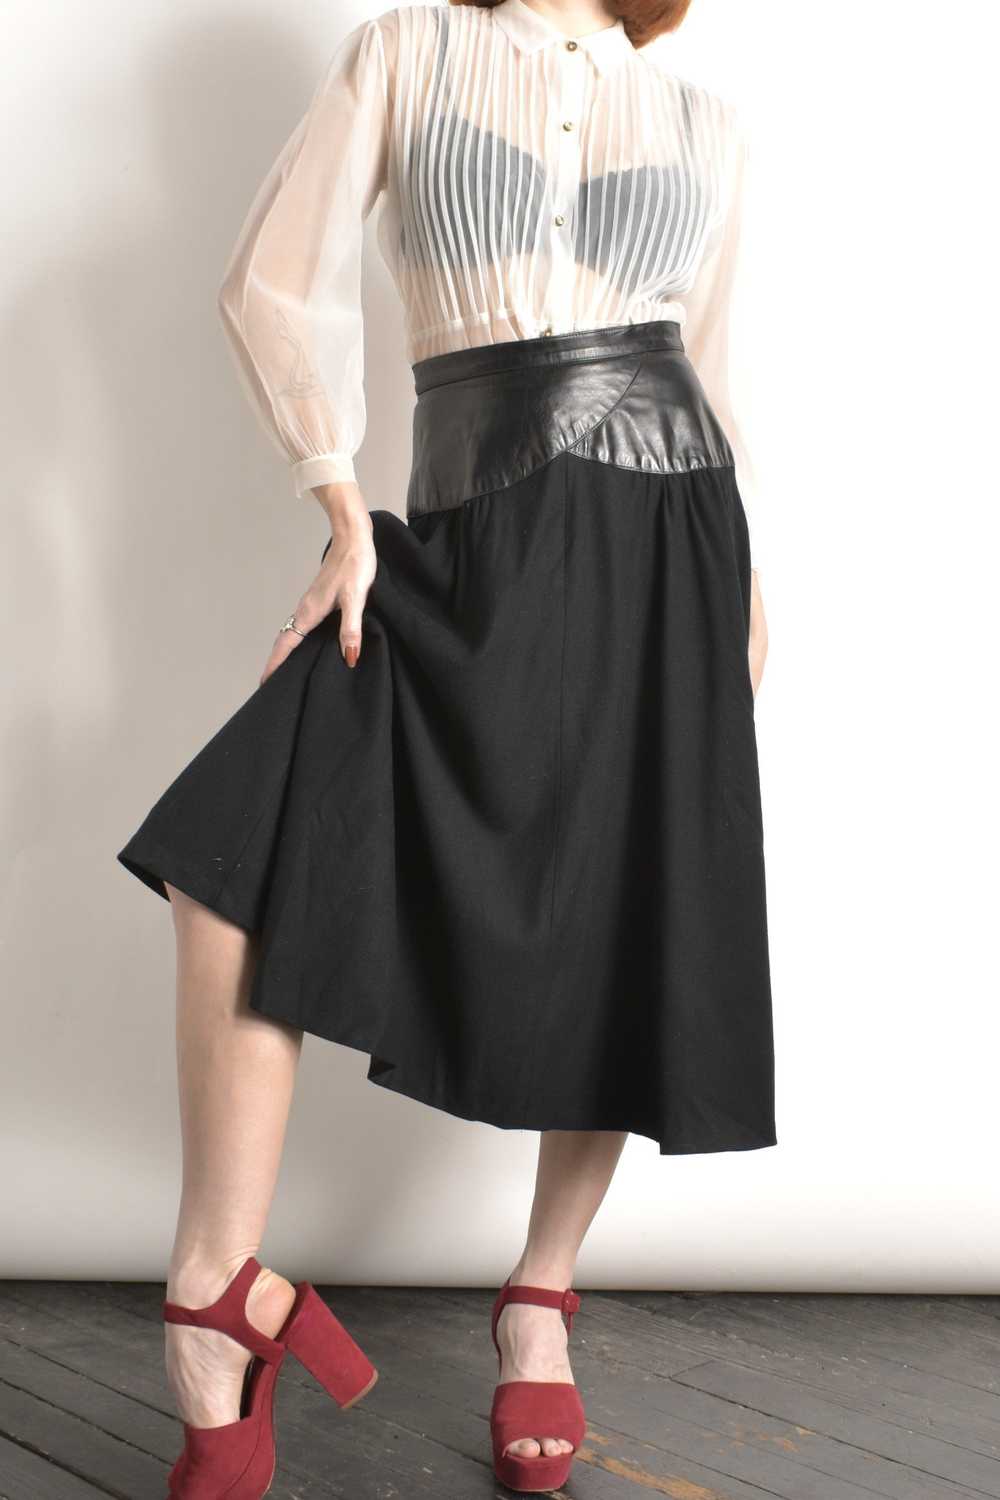 1980s Wool and Leather Skirt-small - image 2